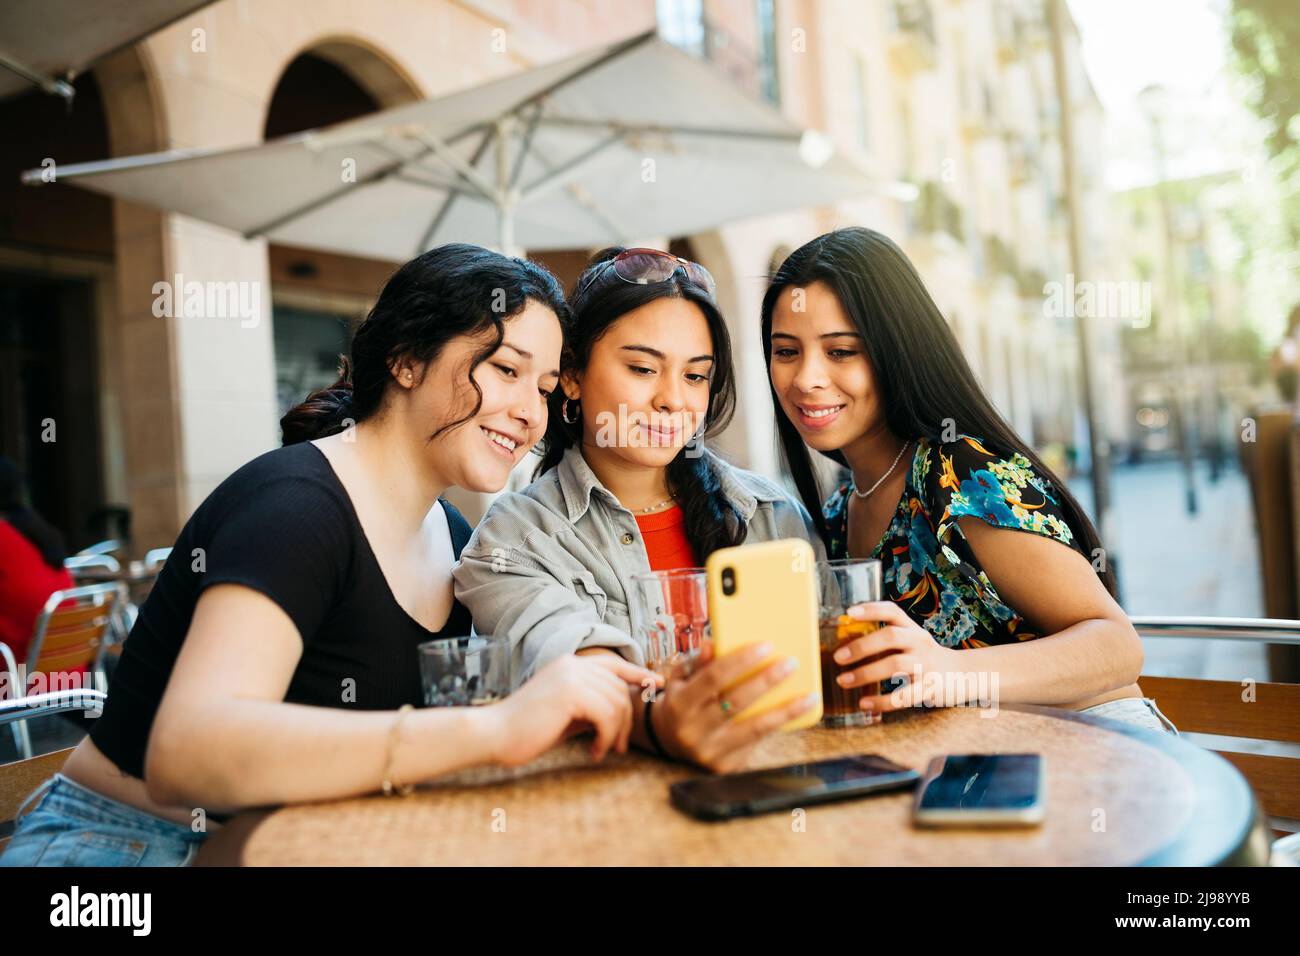 Three young women taking a selfie with a phone on terrace of a restaurant Stock Photo